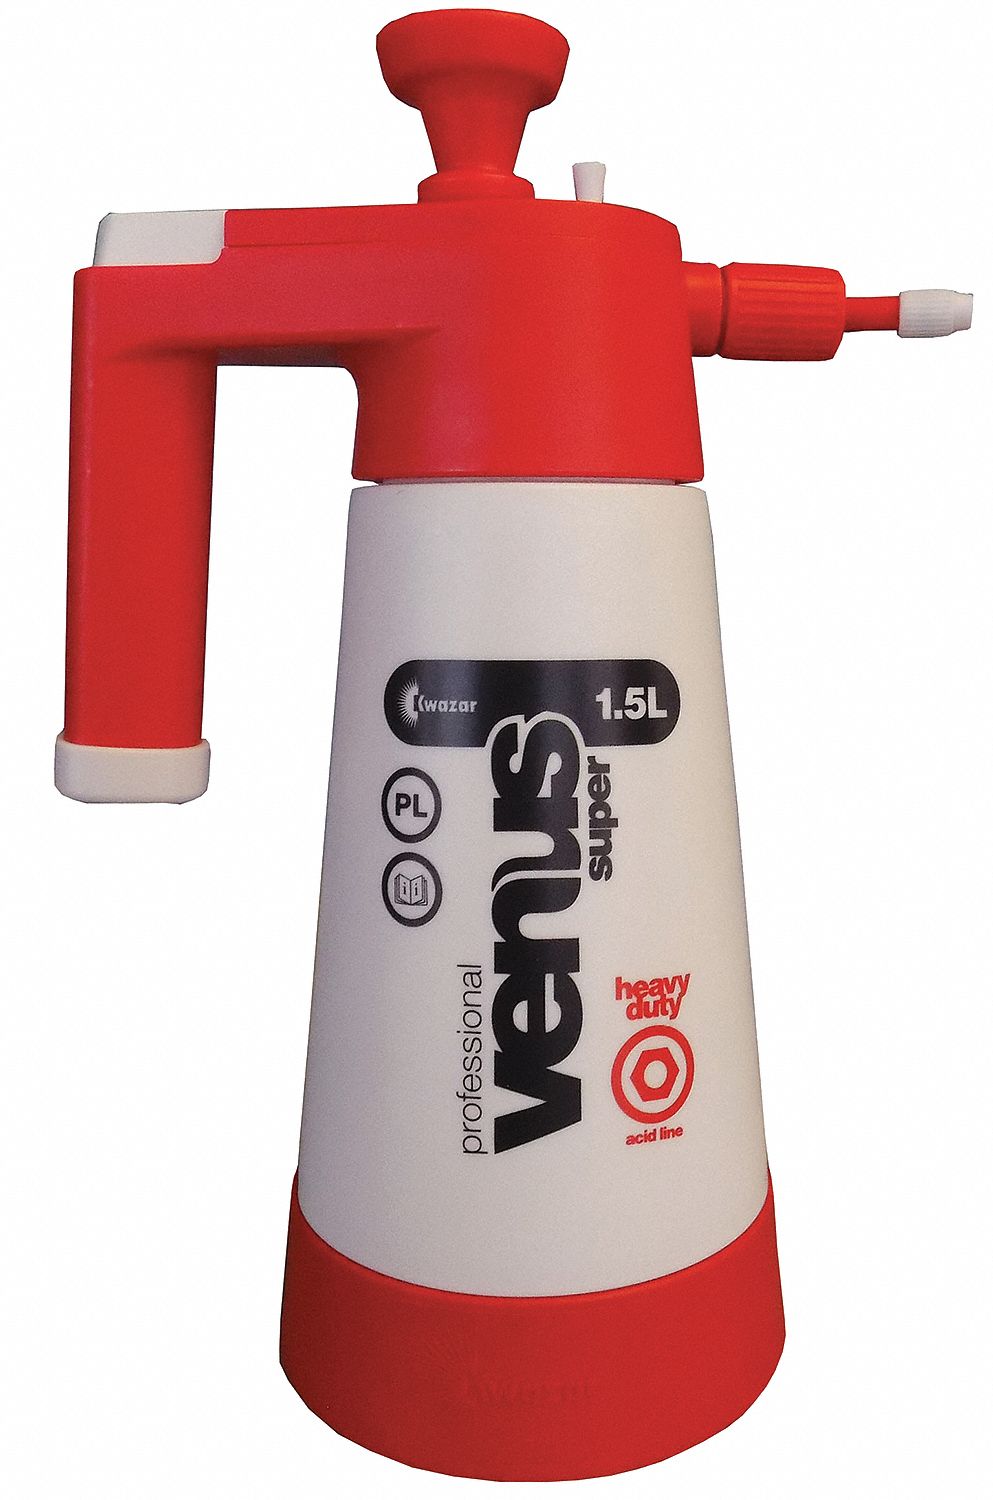 Compressed Air Spray Bottle: 1.5 L Container Capacity, Mist, White, Red, Viton